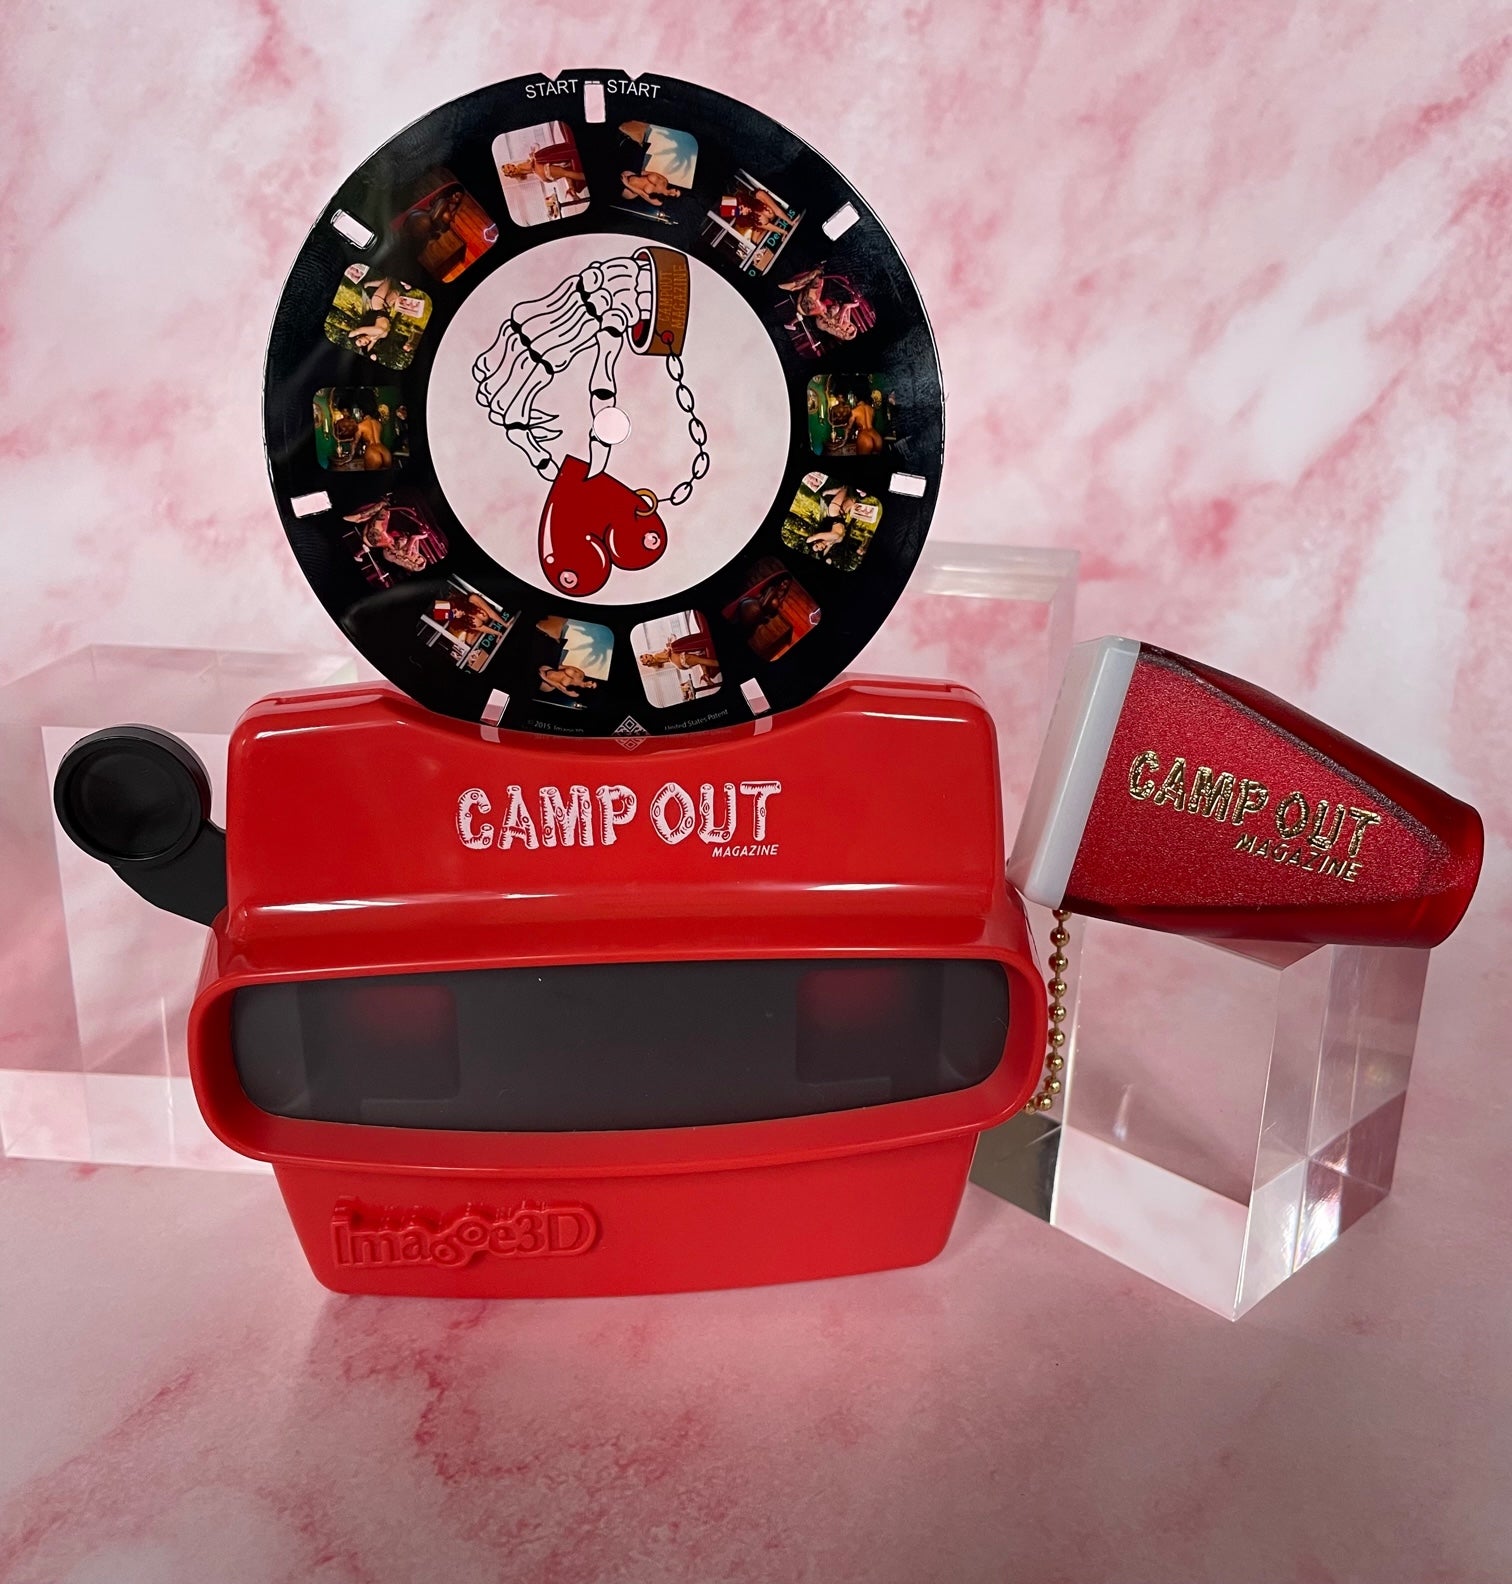 ONLY 25 LEFT! Camp Out Viewfinder with BONUS MINI VIEWFINDER